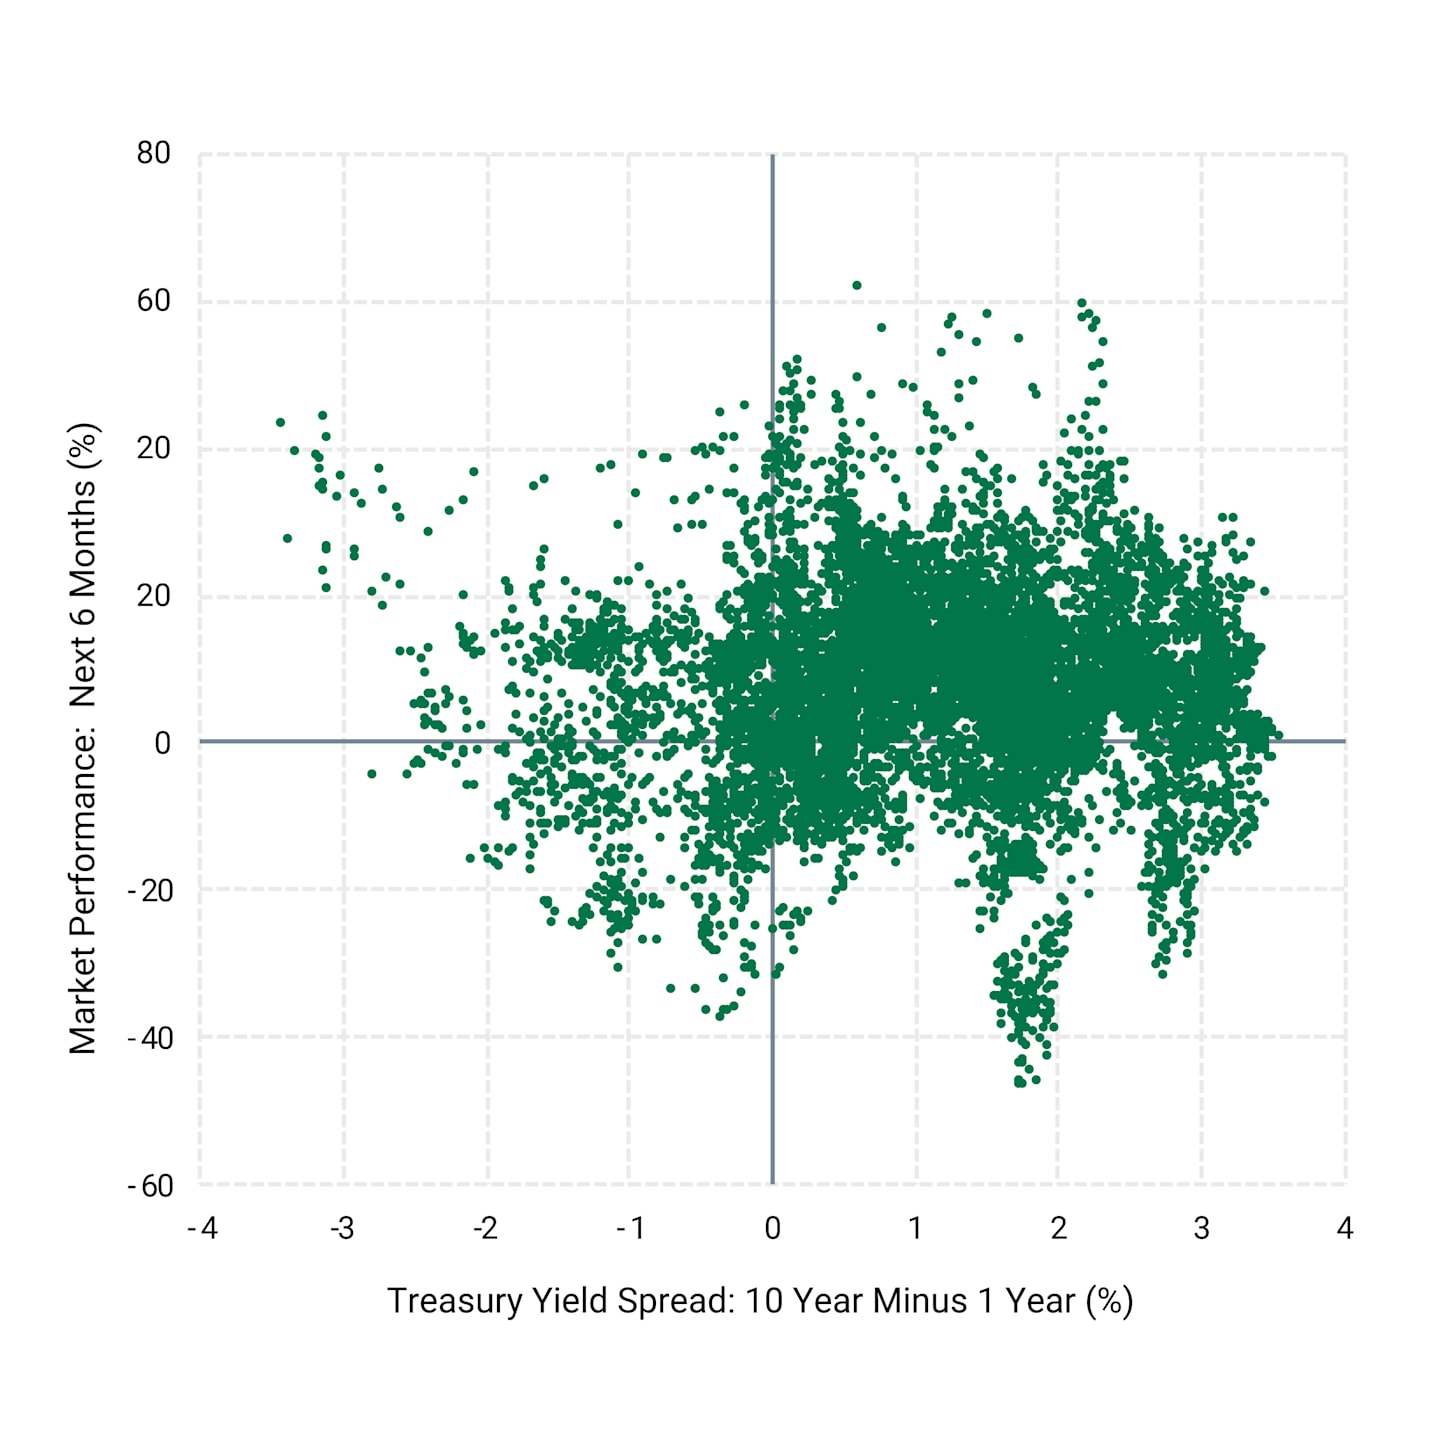 Current Yield Spreads and Stock Market Performance